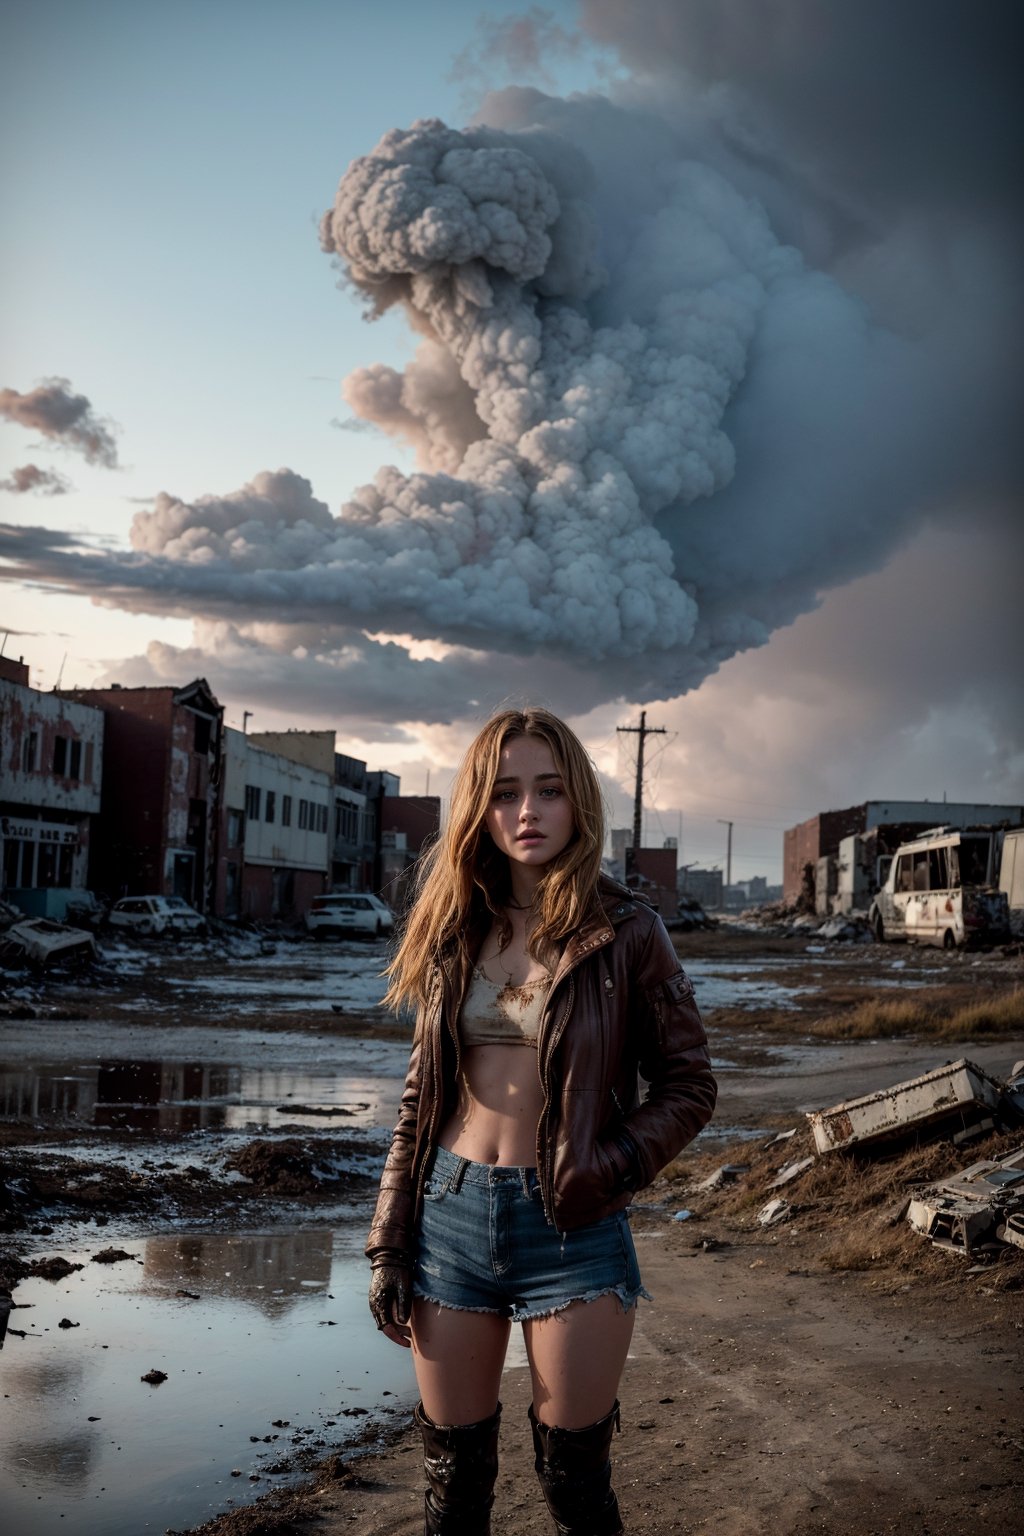 "Imagine Ella Purnell as Lucy Maclean in a post-apocalyptic world. Her attire is torn and tattered, showcasing the hardships of survival in a hostile environment. Her hair is disheveled, reflecting the constant struggle to endure in this new world. The image, created with the utmost realism and quality, captures Lucy in a moment of determination and bravery as she confronts the challenges left behind by the apocalypse. The backdrop depicts a ravaged landscape, with ruins and debris that enhance the desolate and chaotic atmosphere of this post-apocalyptic world."